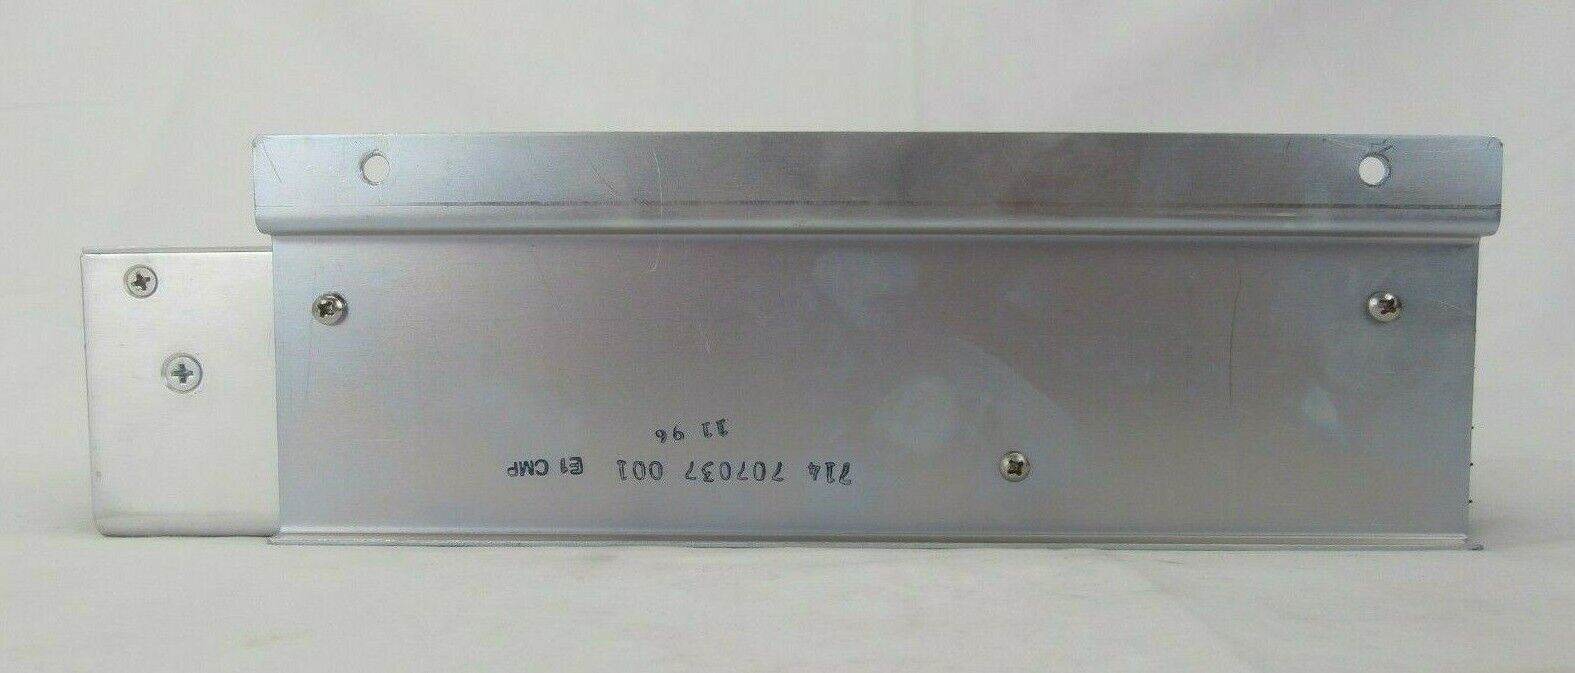 Deltron 11686XA Power Supply 666 Watts Lam Research FPD Continuum Working Spare